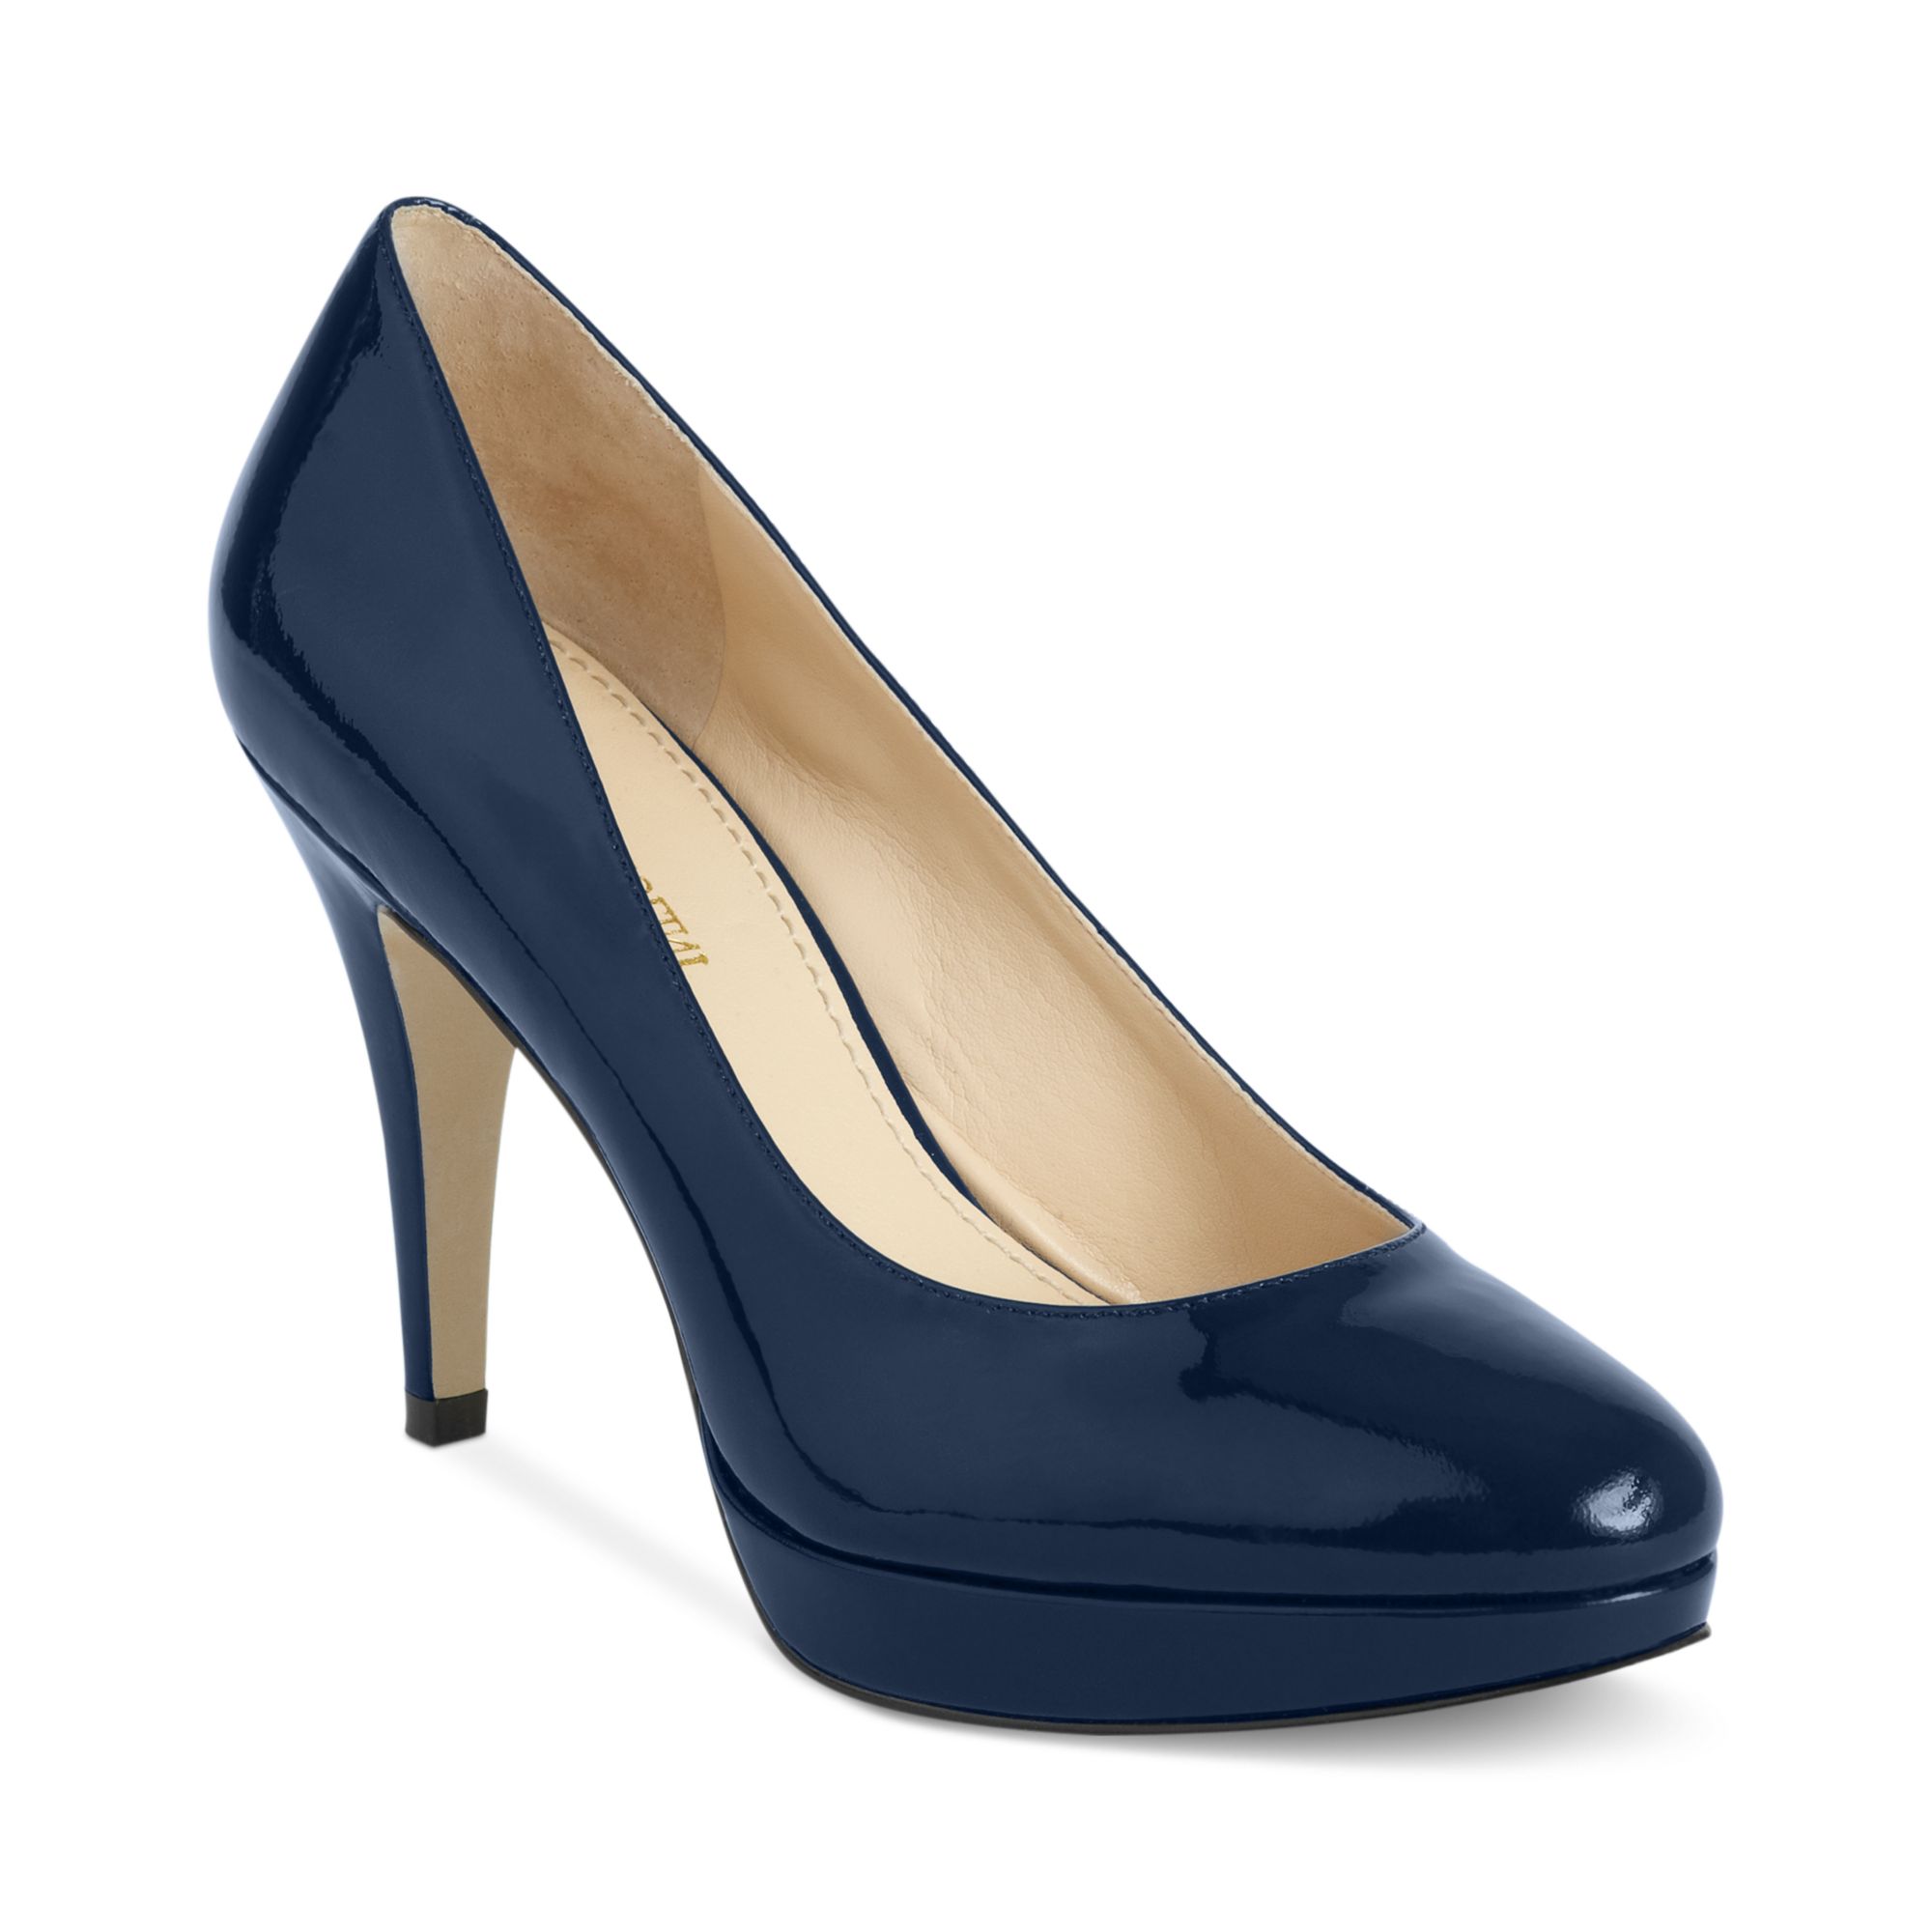 Enzo Angiolini Dixy Platform Pumps in Blue (Navy Patent) | Lyst